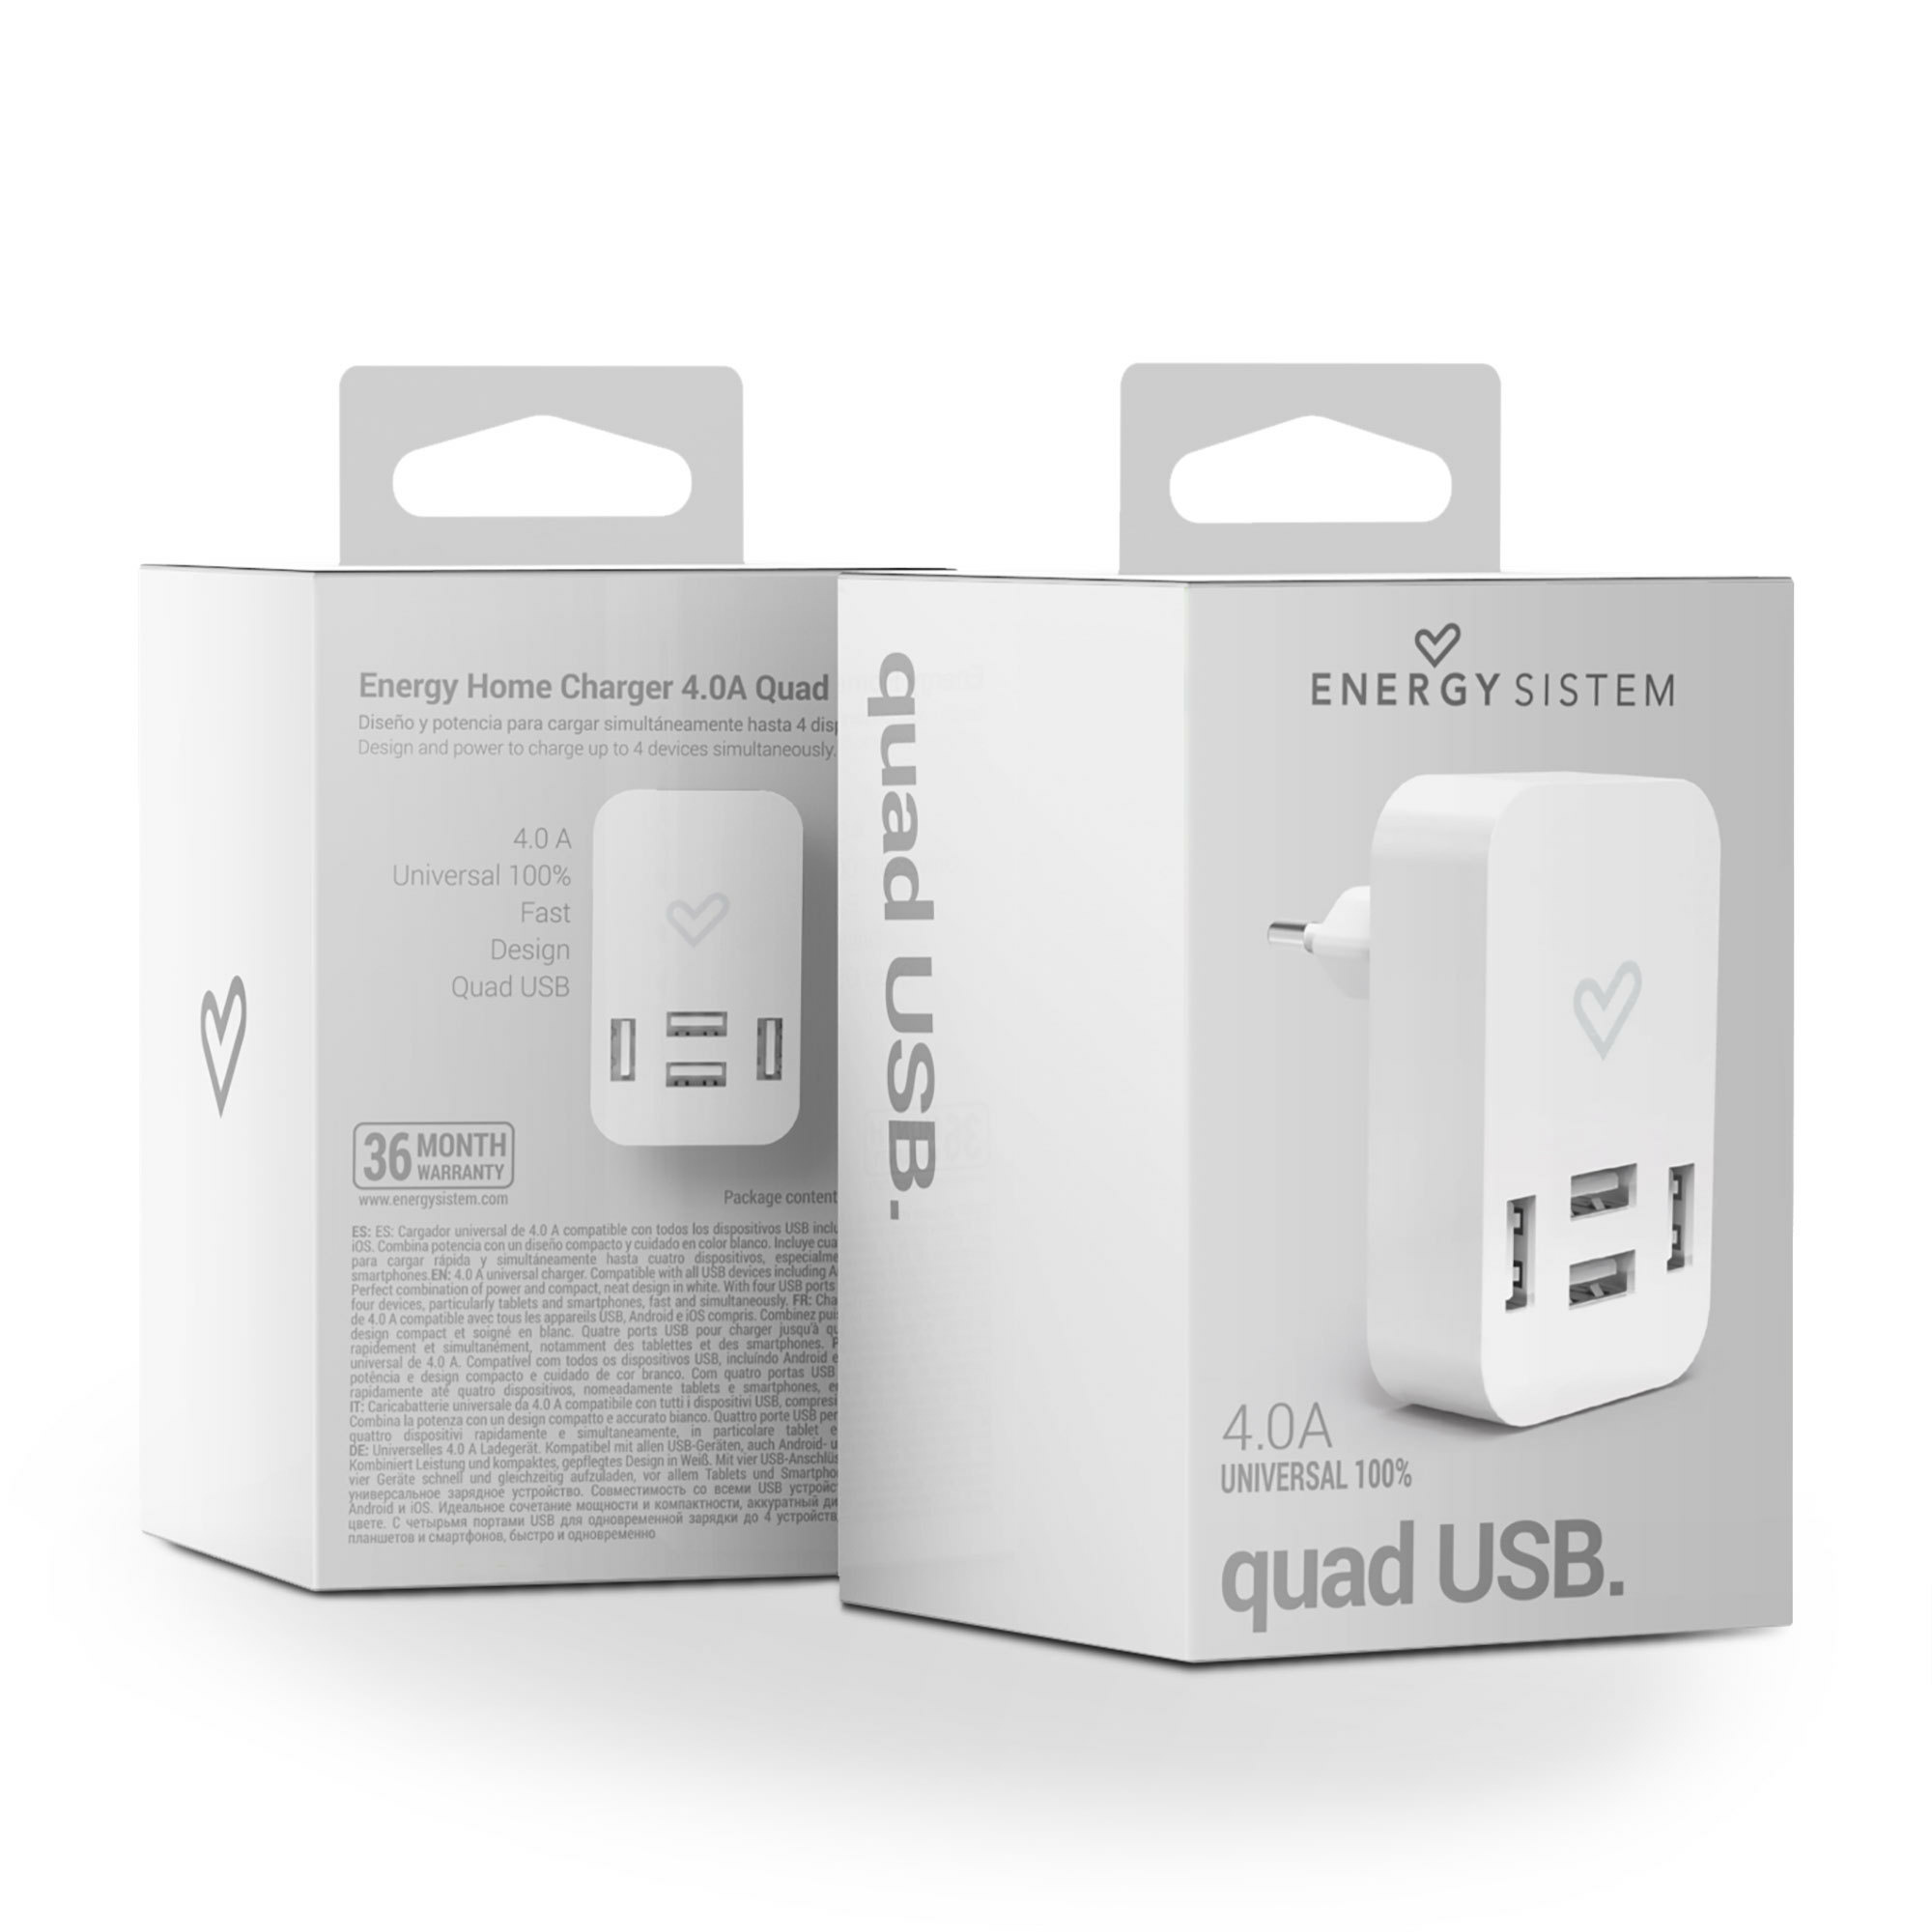 Energy Home Charger 4.0A Quad USB packaging